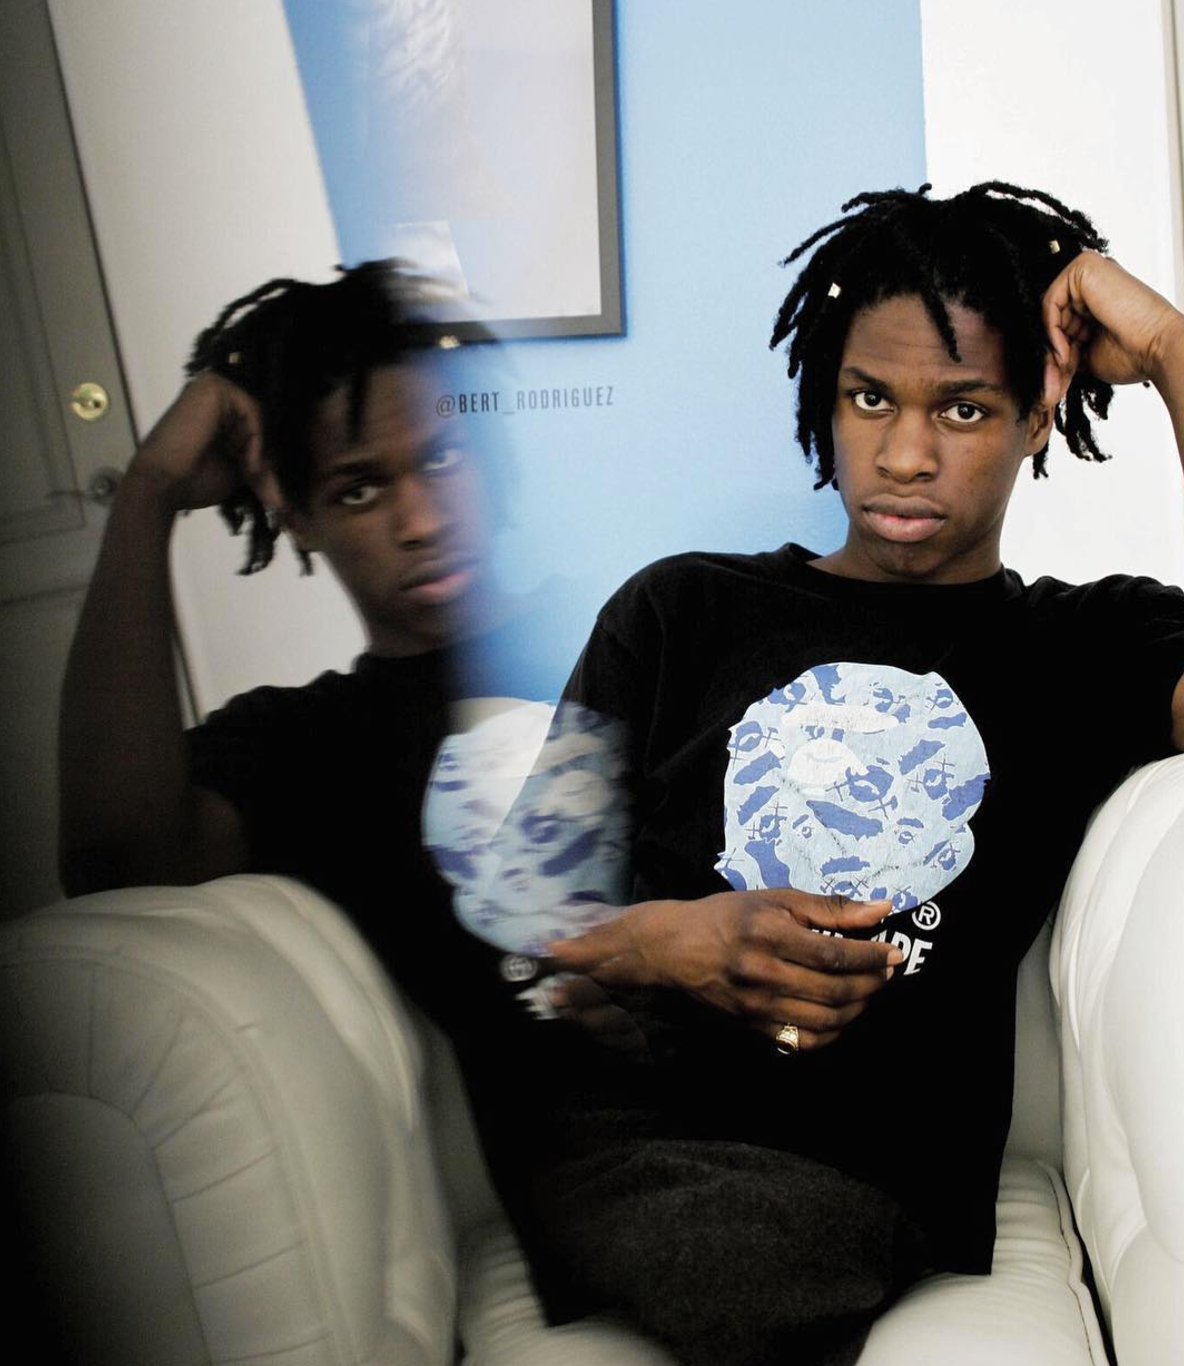 Daniel Caesar Reveals New Album ‘Freudian’ With Dreamy Visuals For ‘We Find Love’/‘Blessed'
